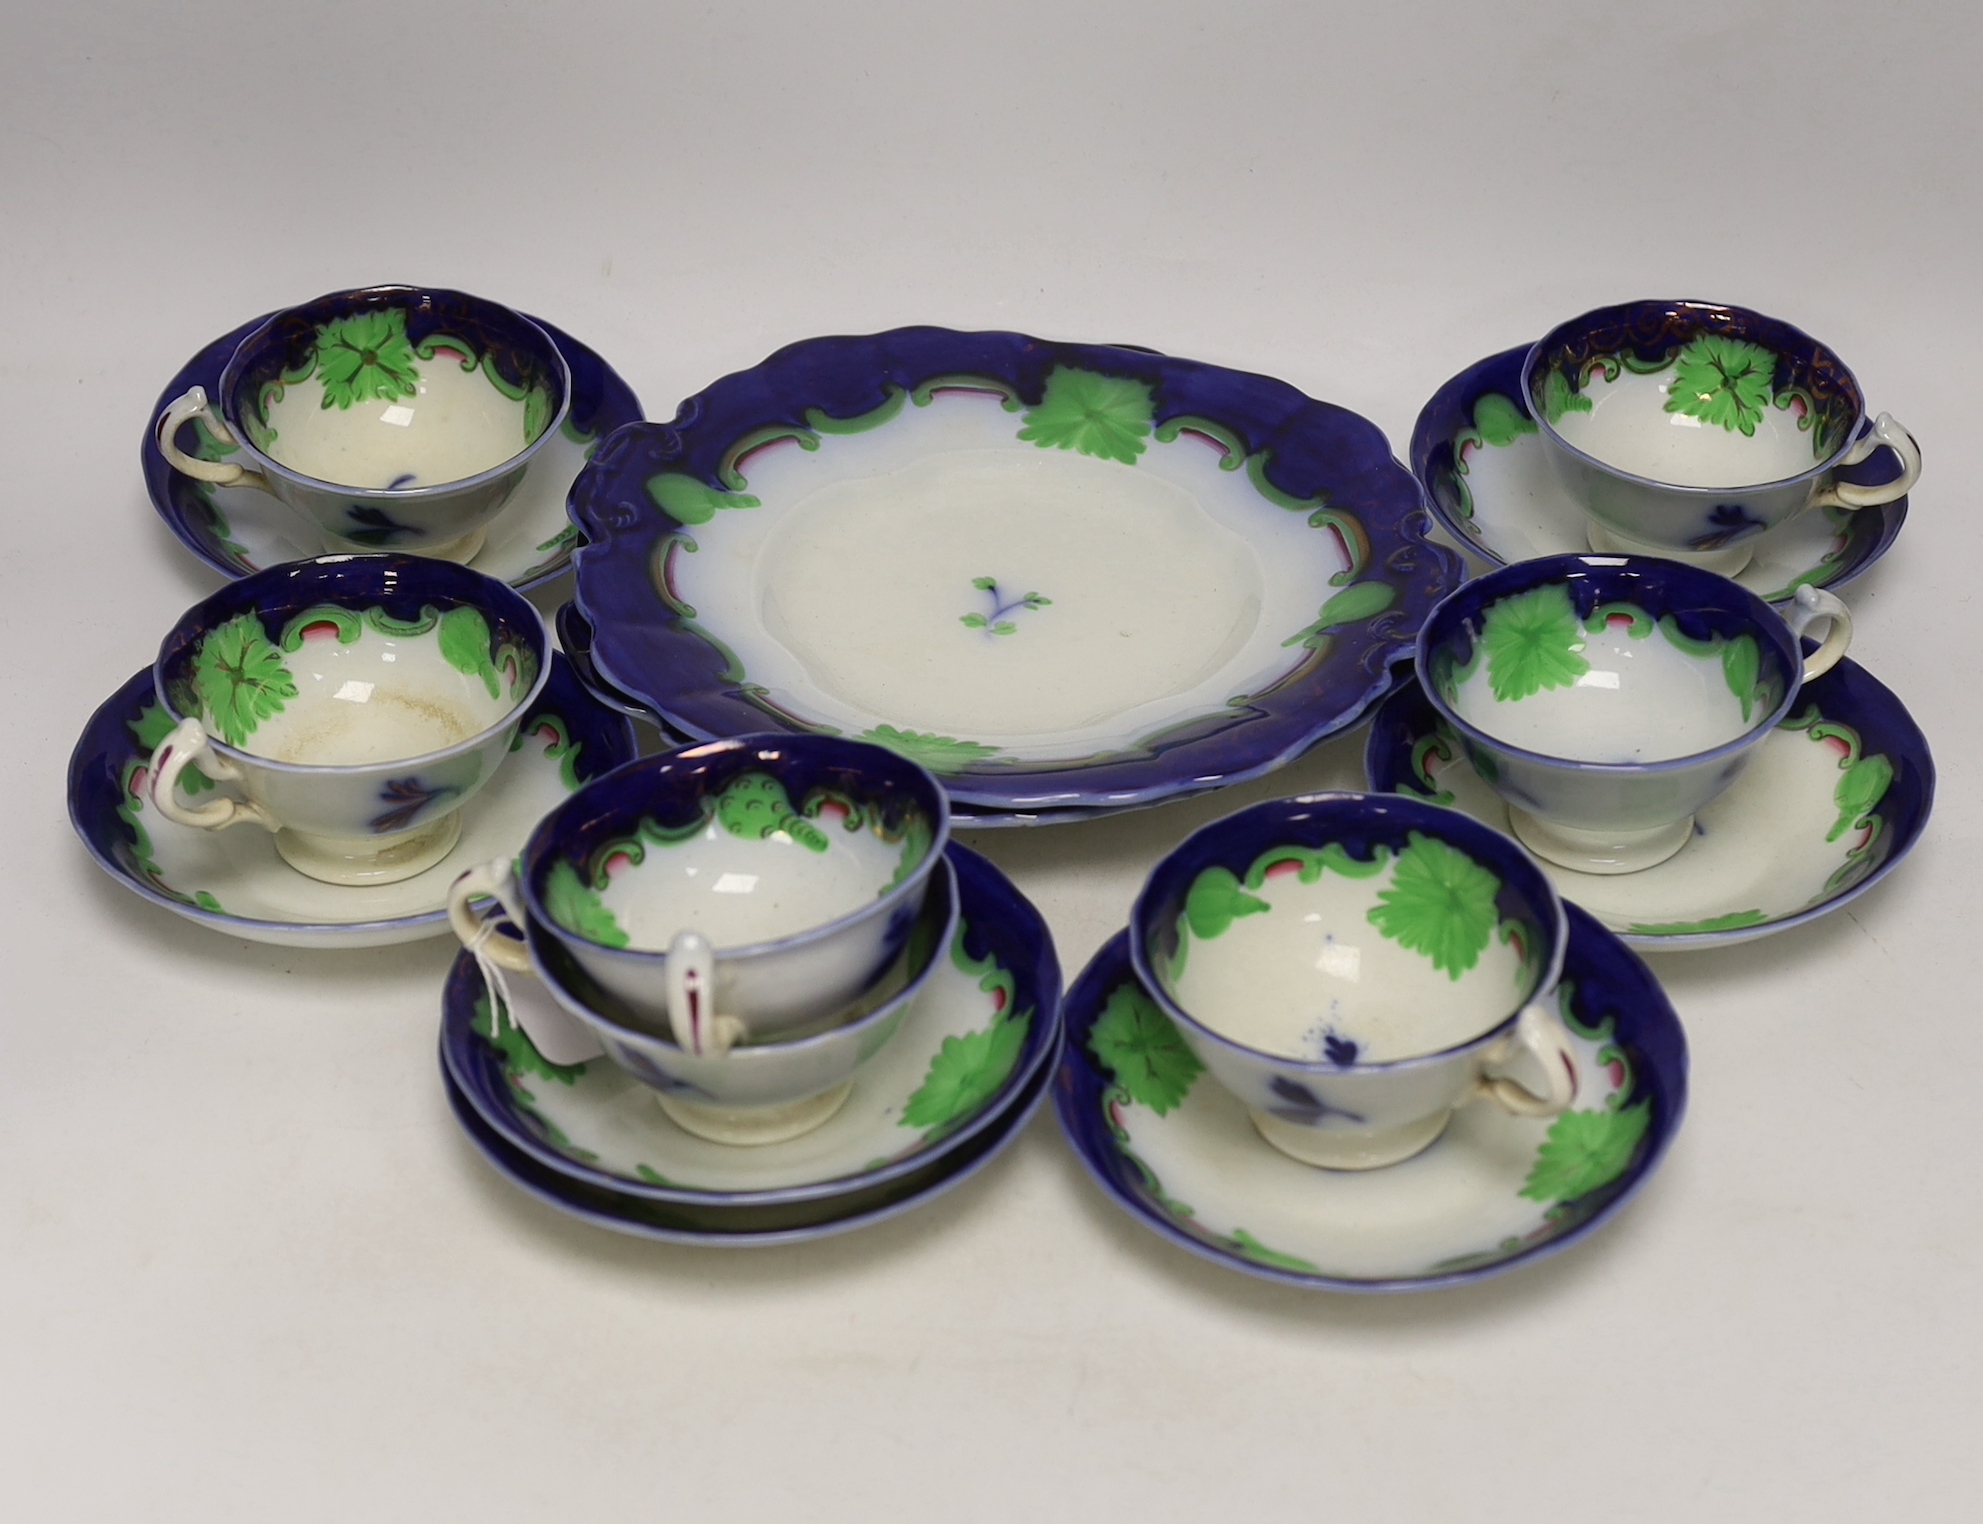 A mid 19th century Gaudy style Welsh part teaset